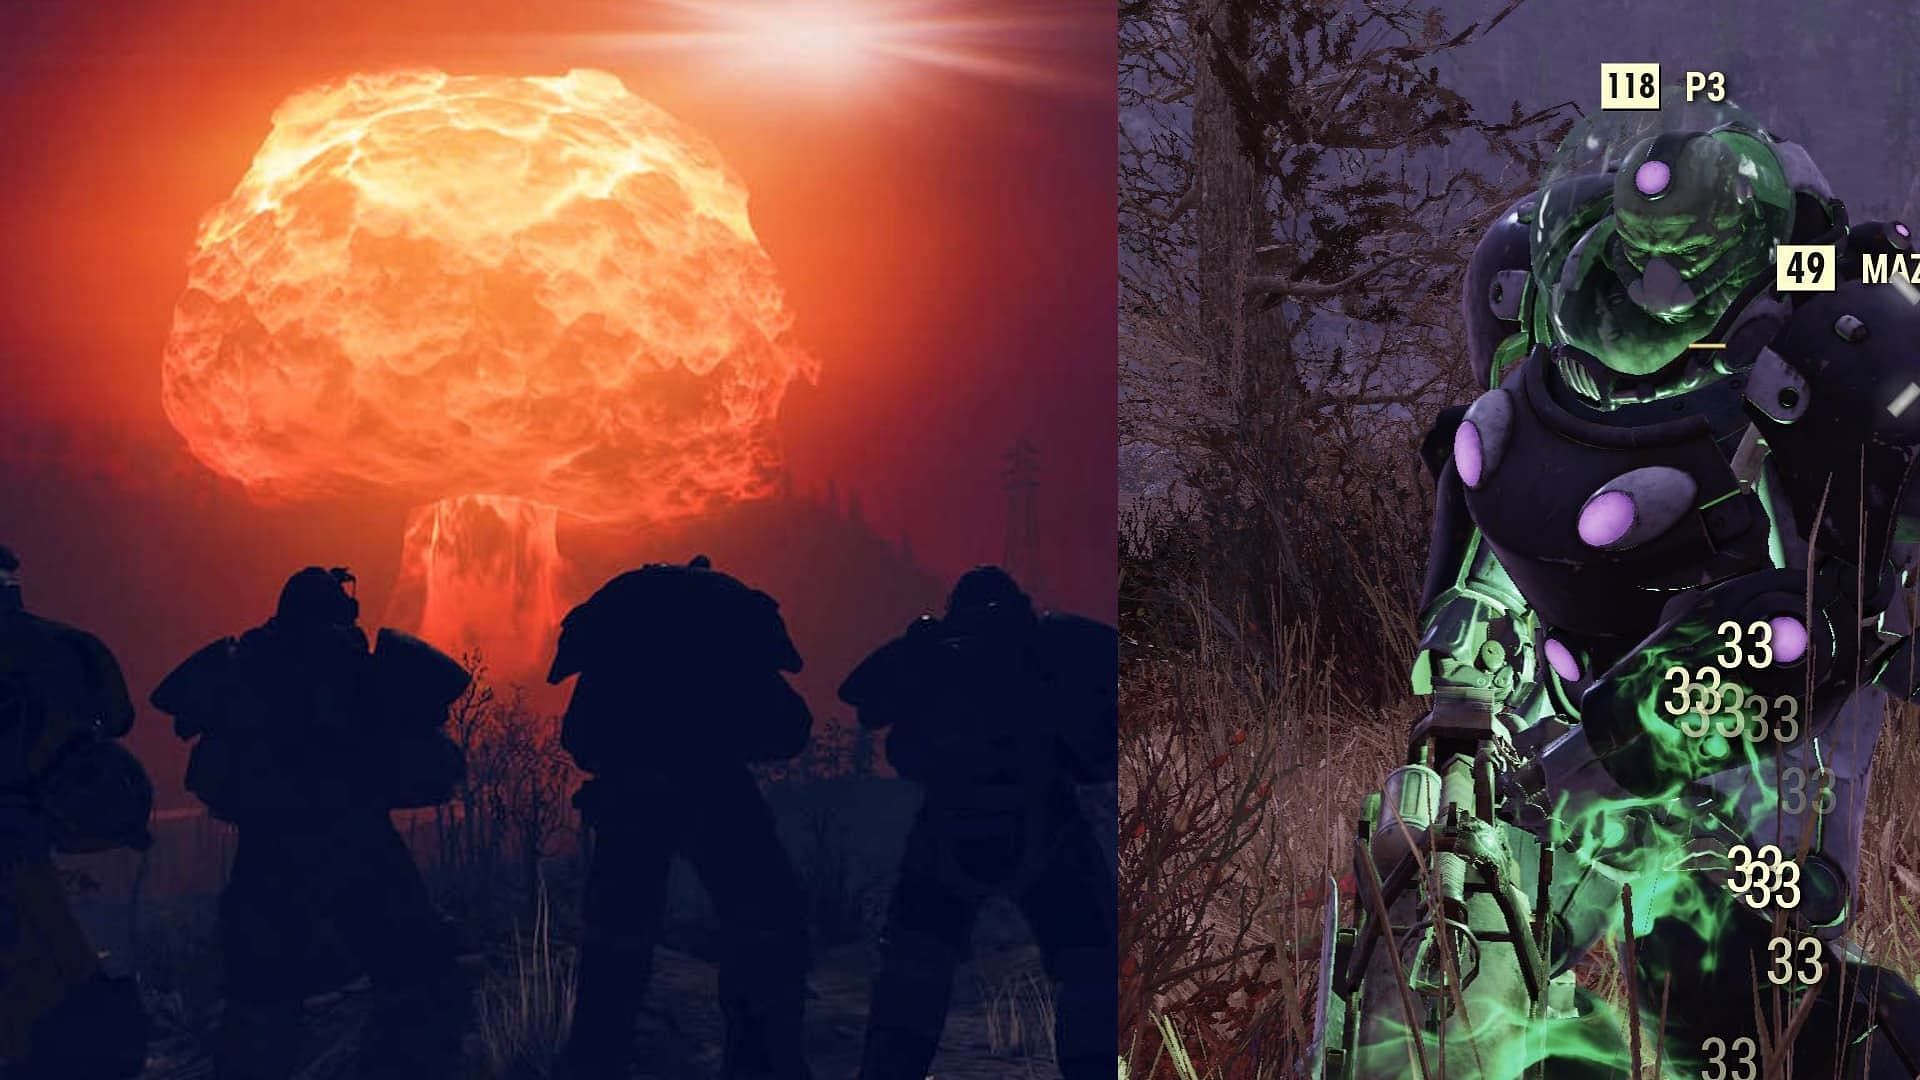 Fallout 76 player nukes Phil Spencer